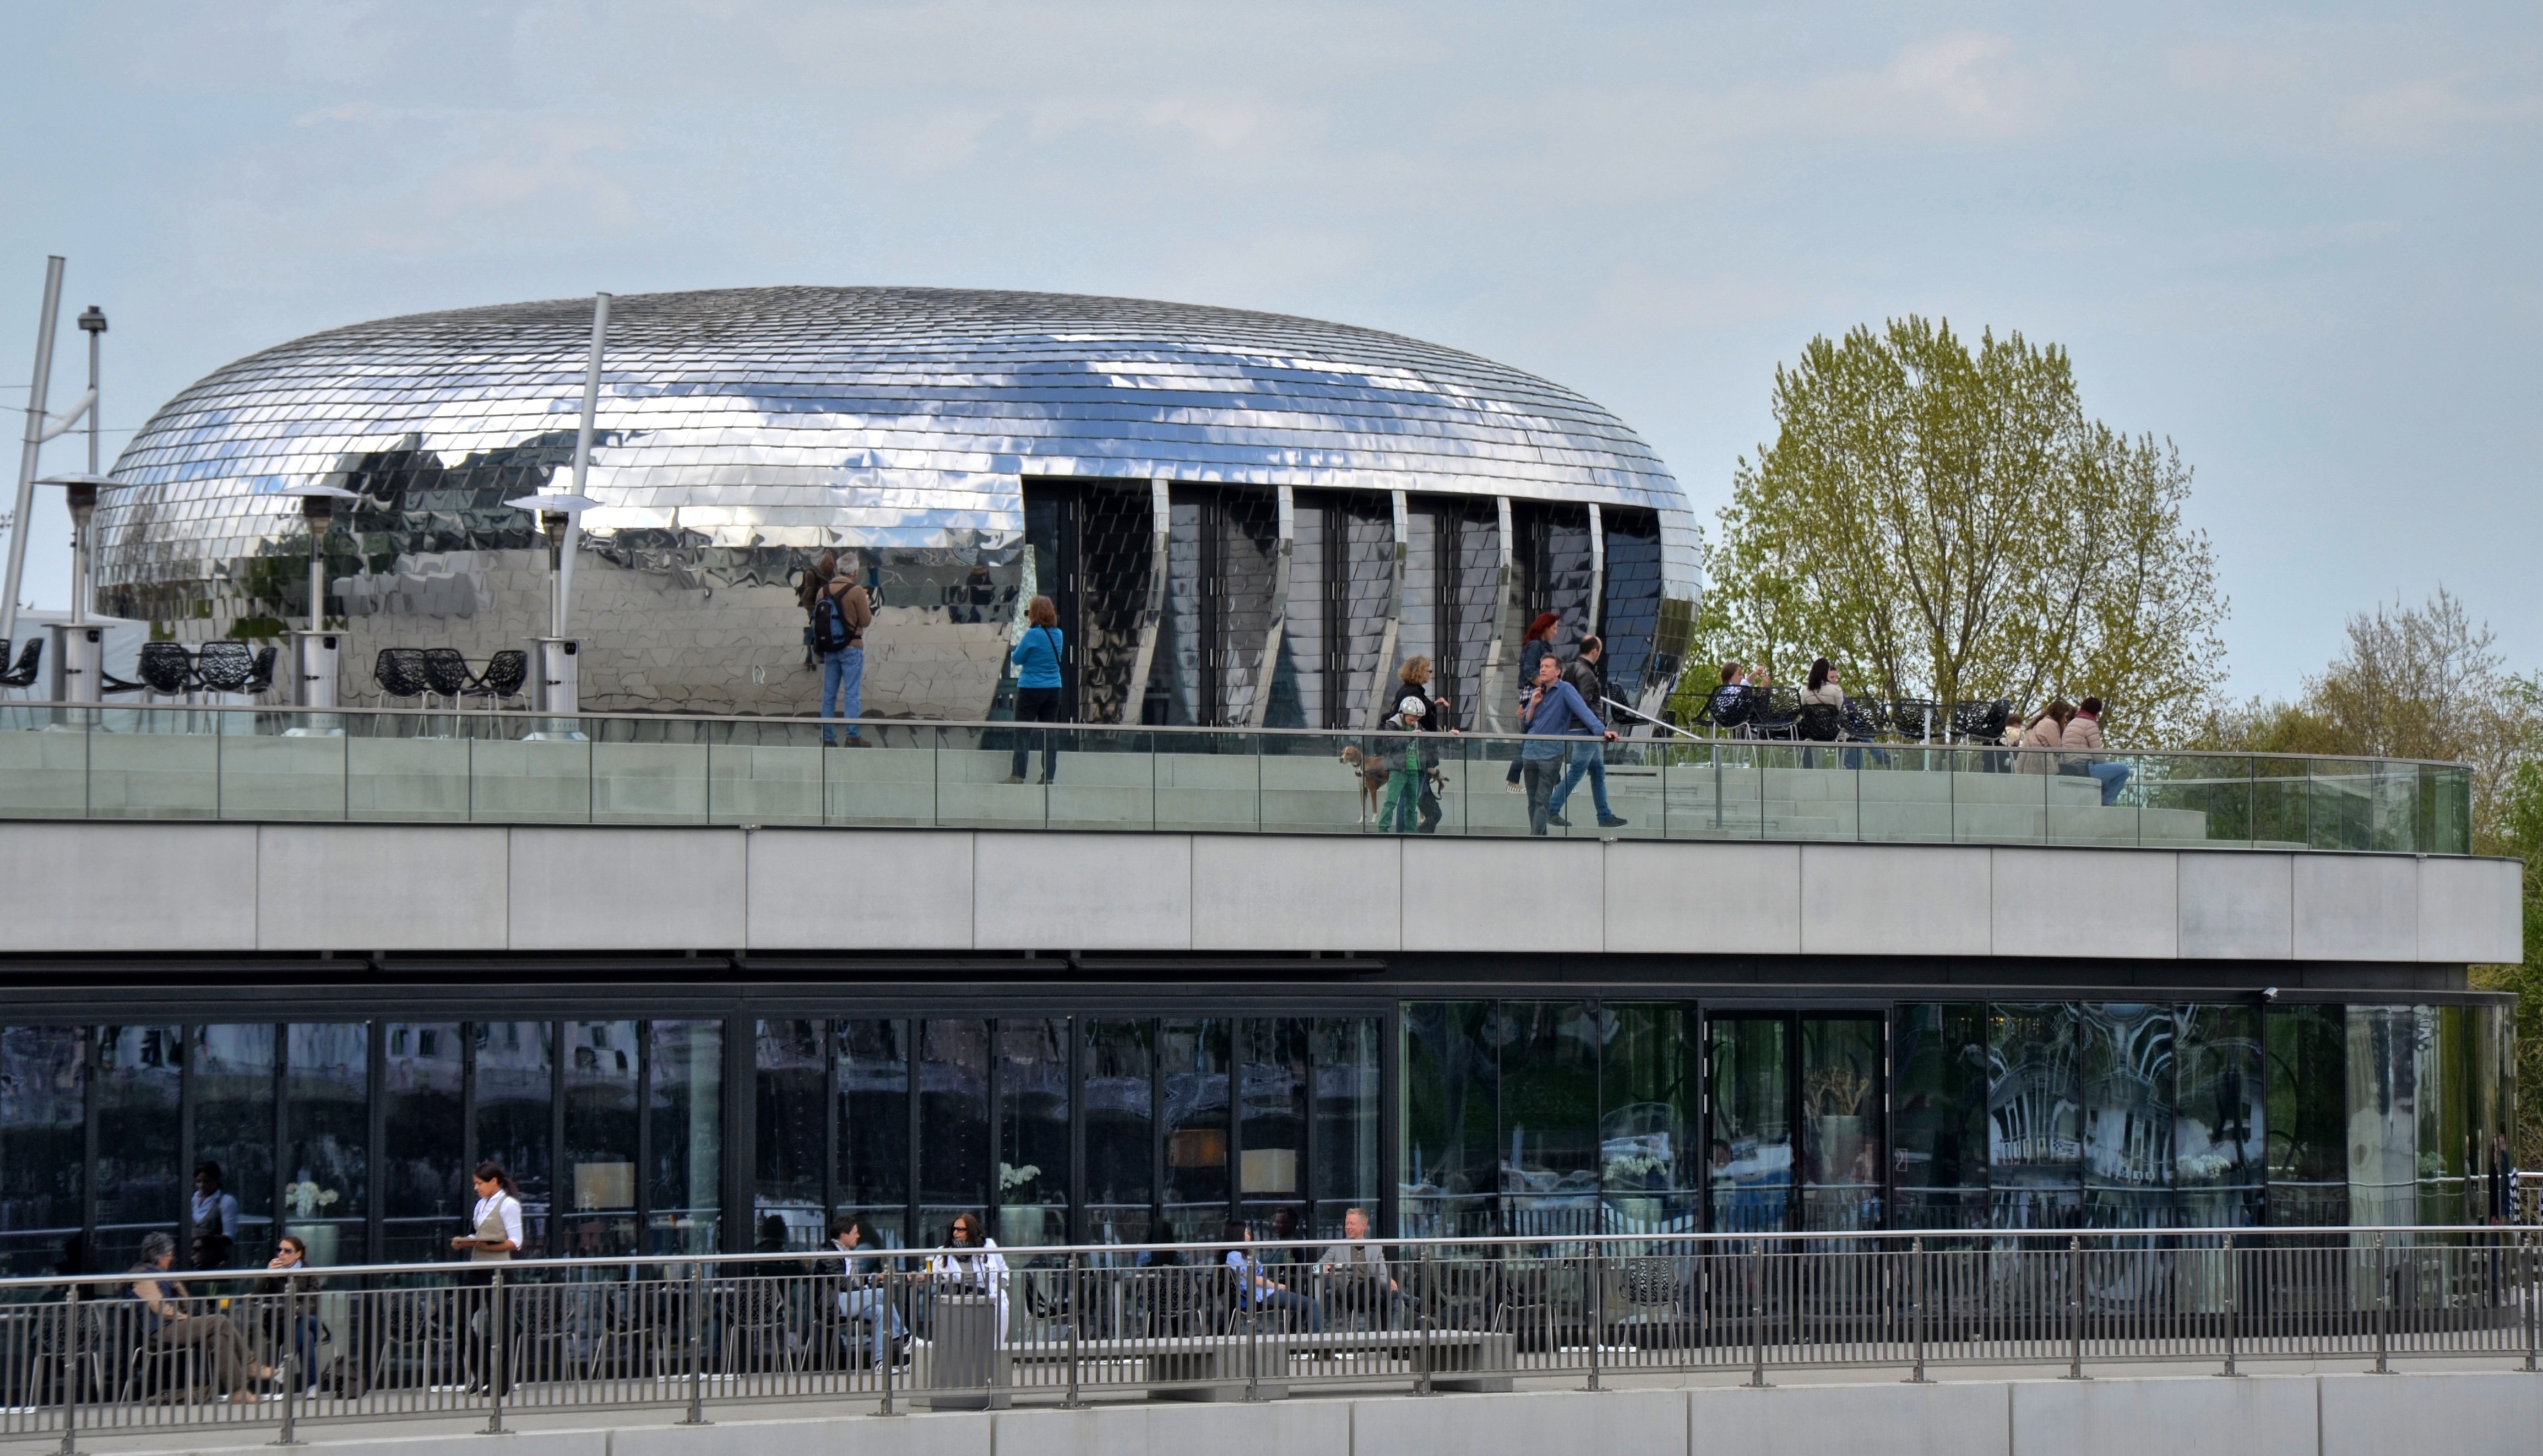 stainless steel dome